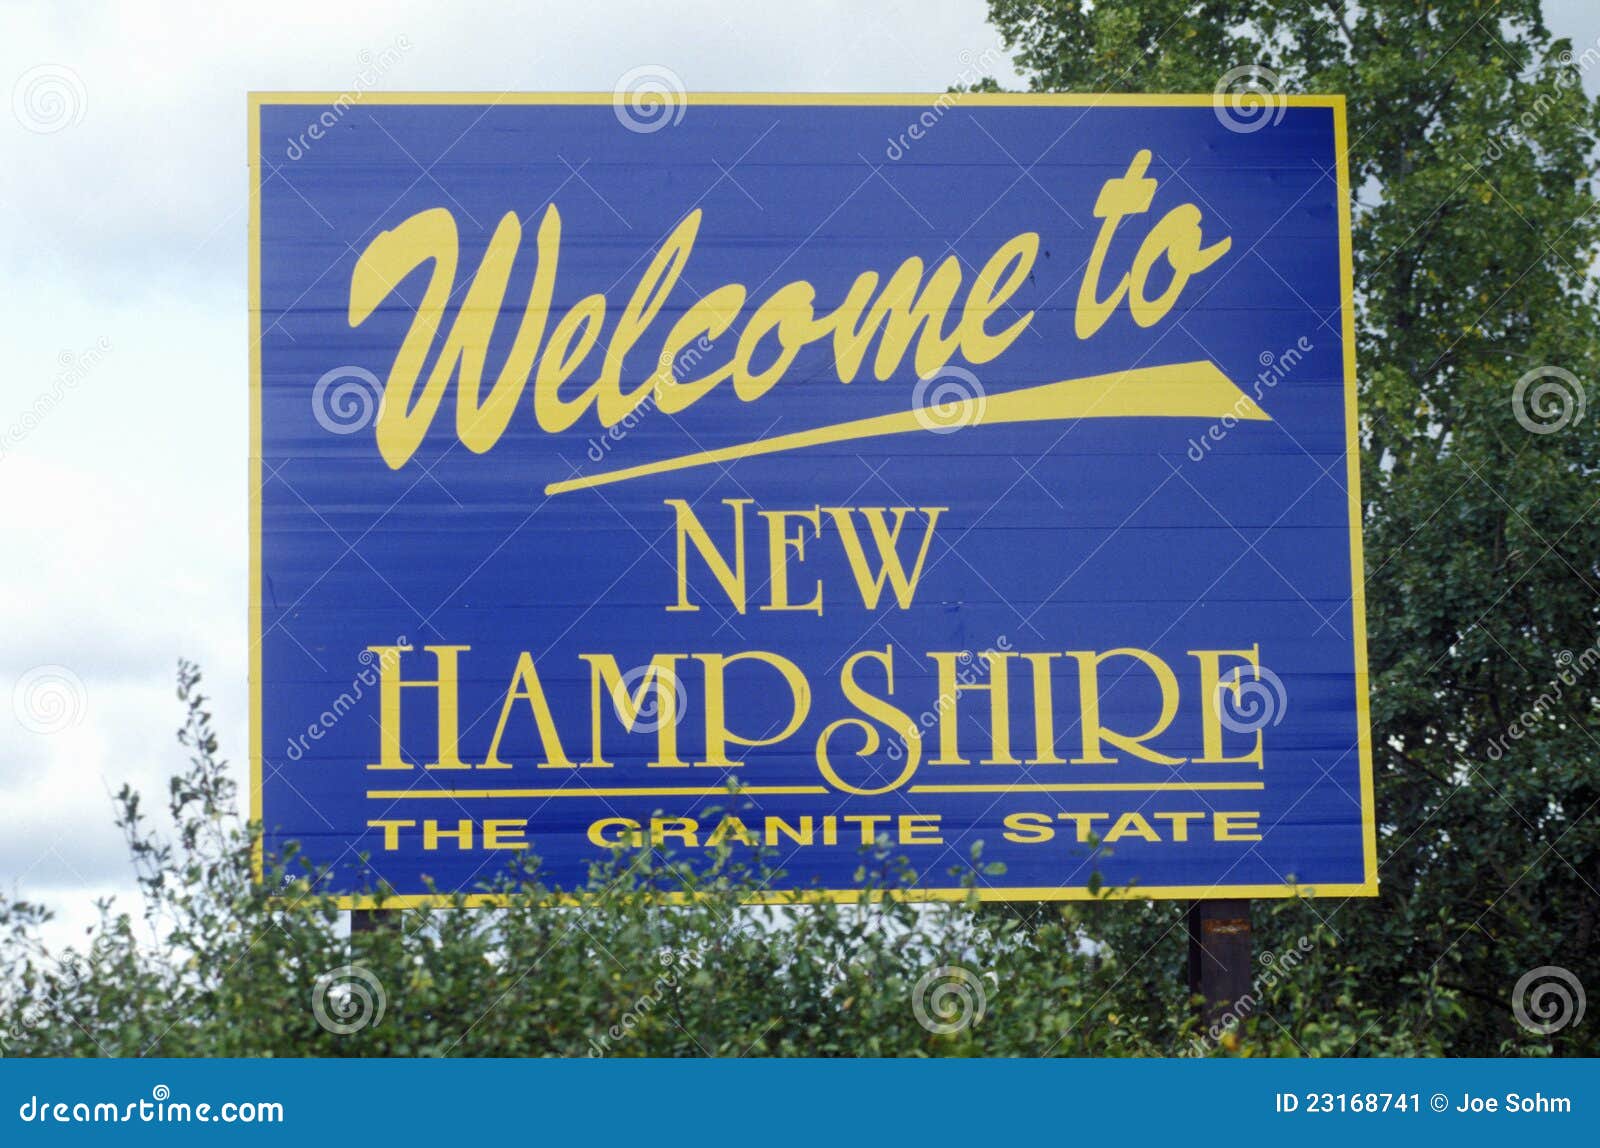 welcome to new hampshire